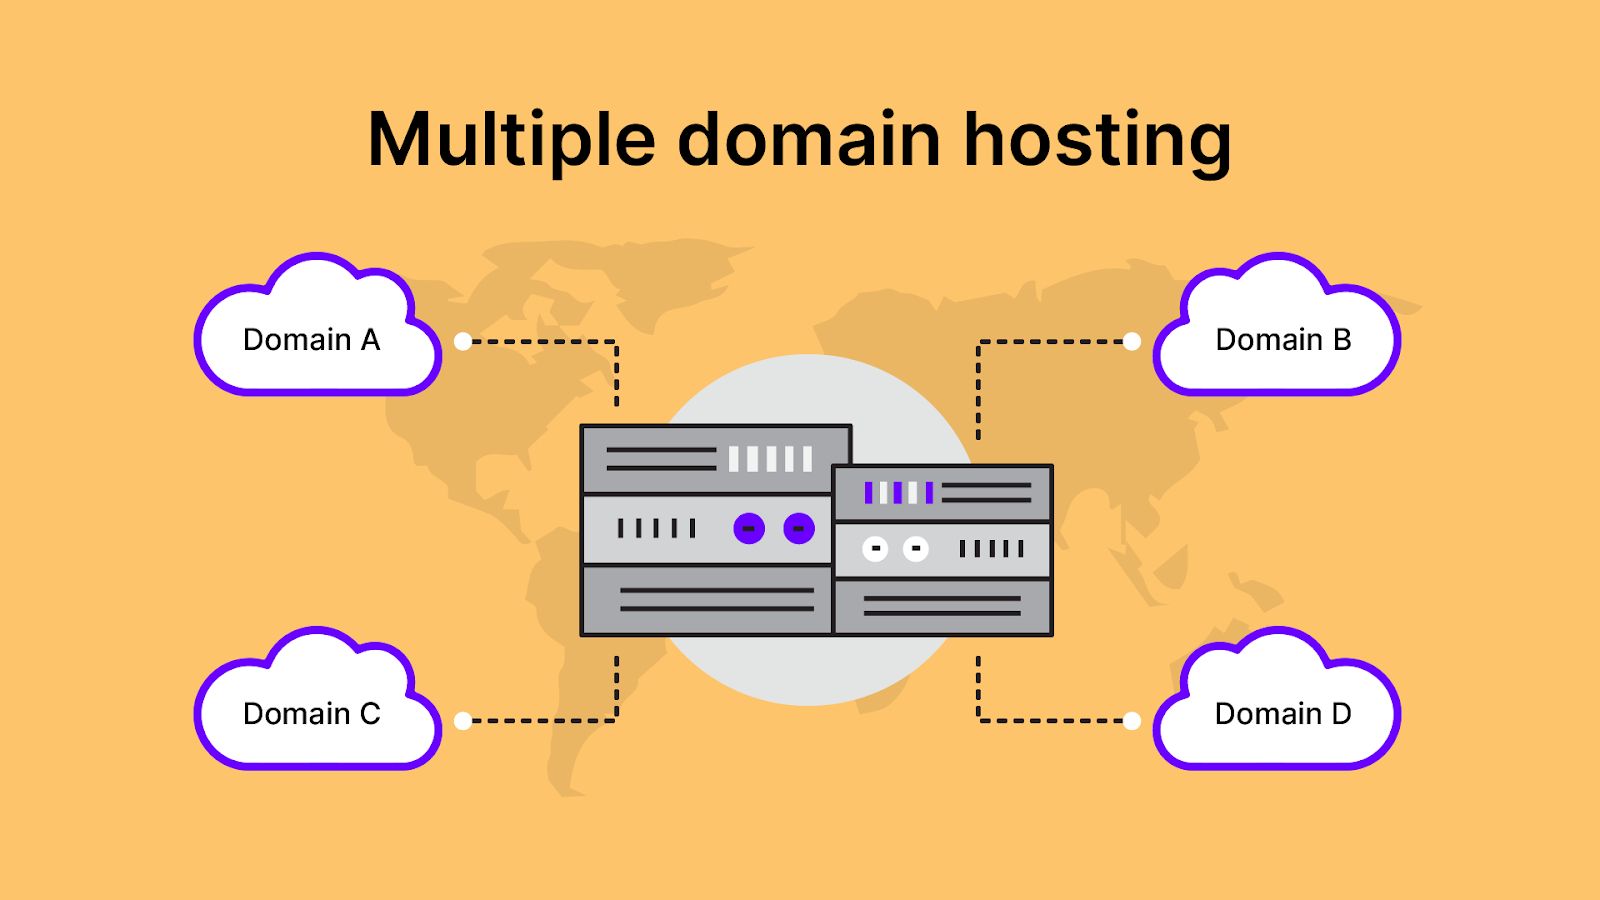 Multiple domain hosting lets you host several websites from one account.